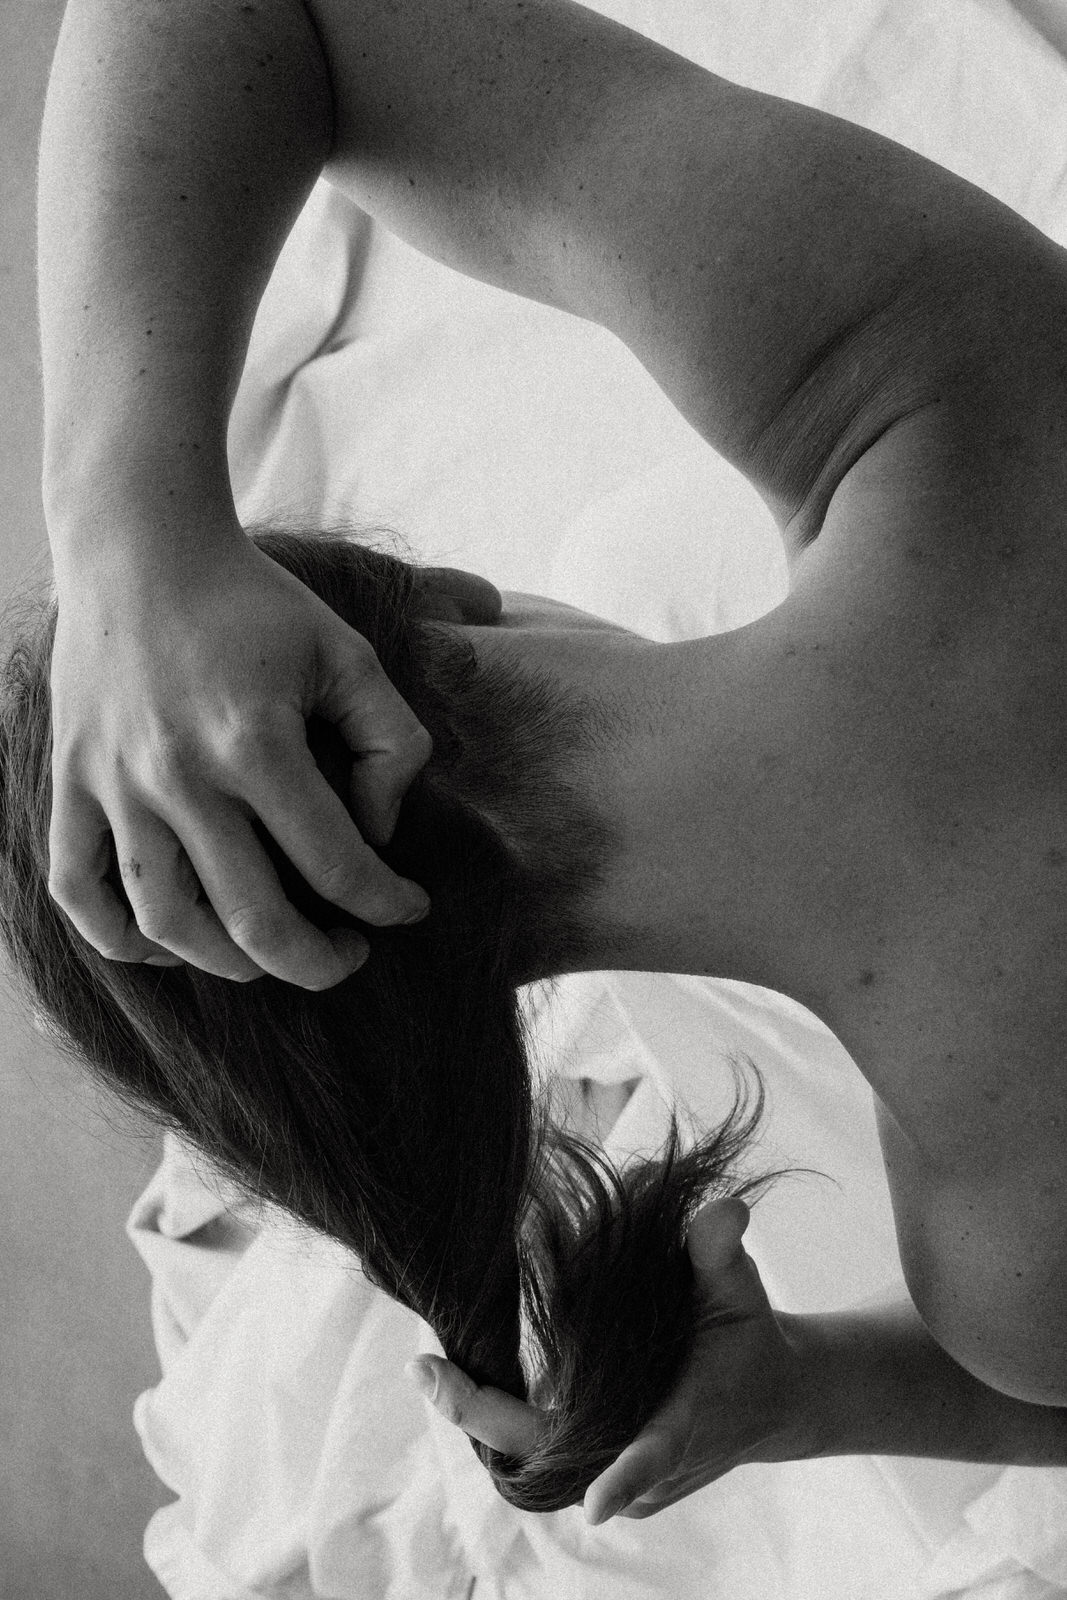 black and white boudoir image of back of woman's neck with hands holding hair off her back